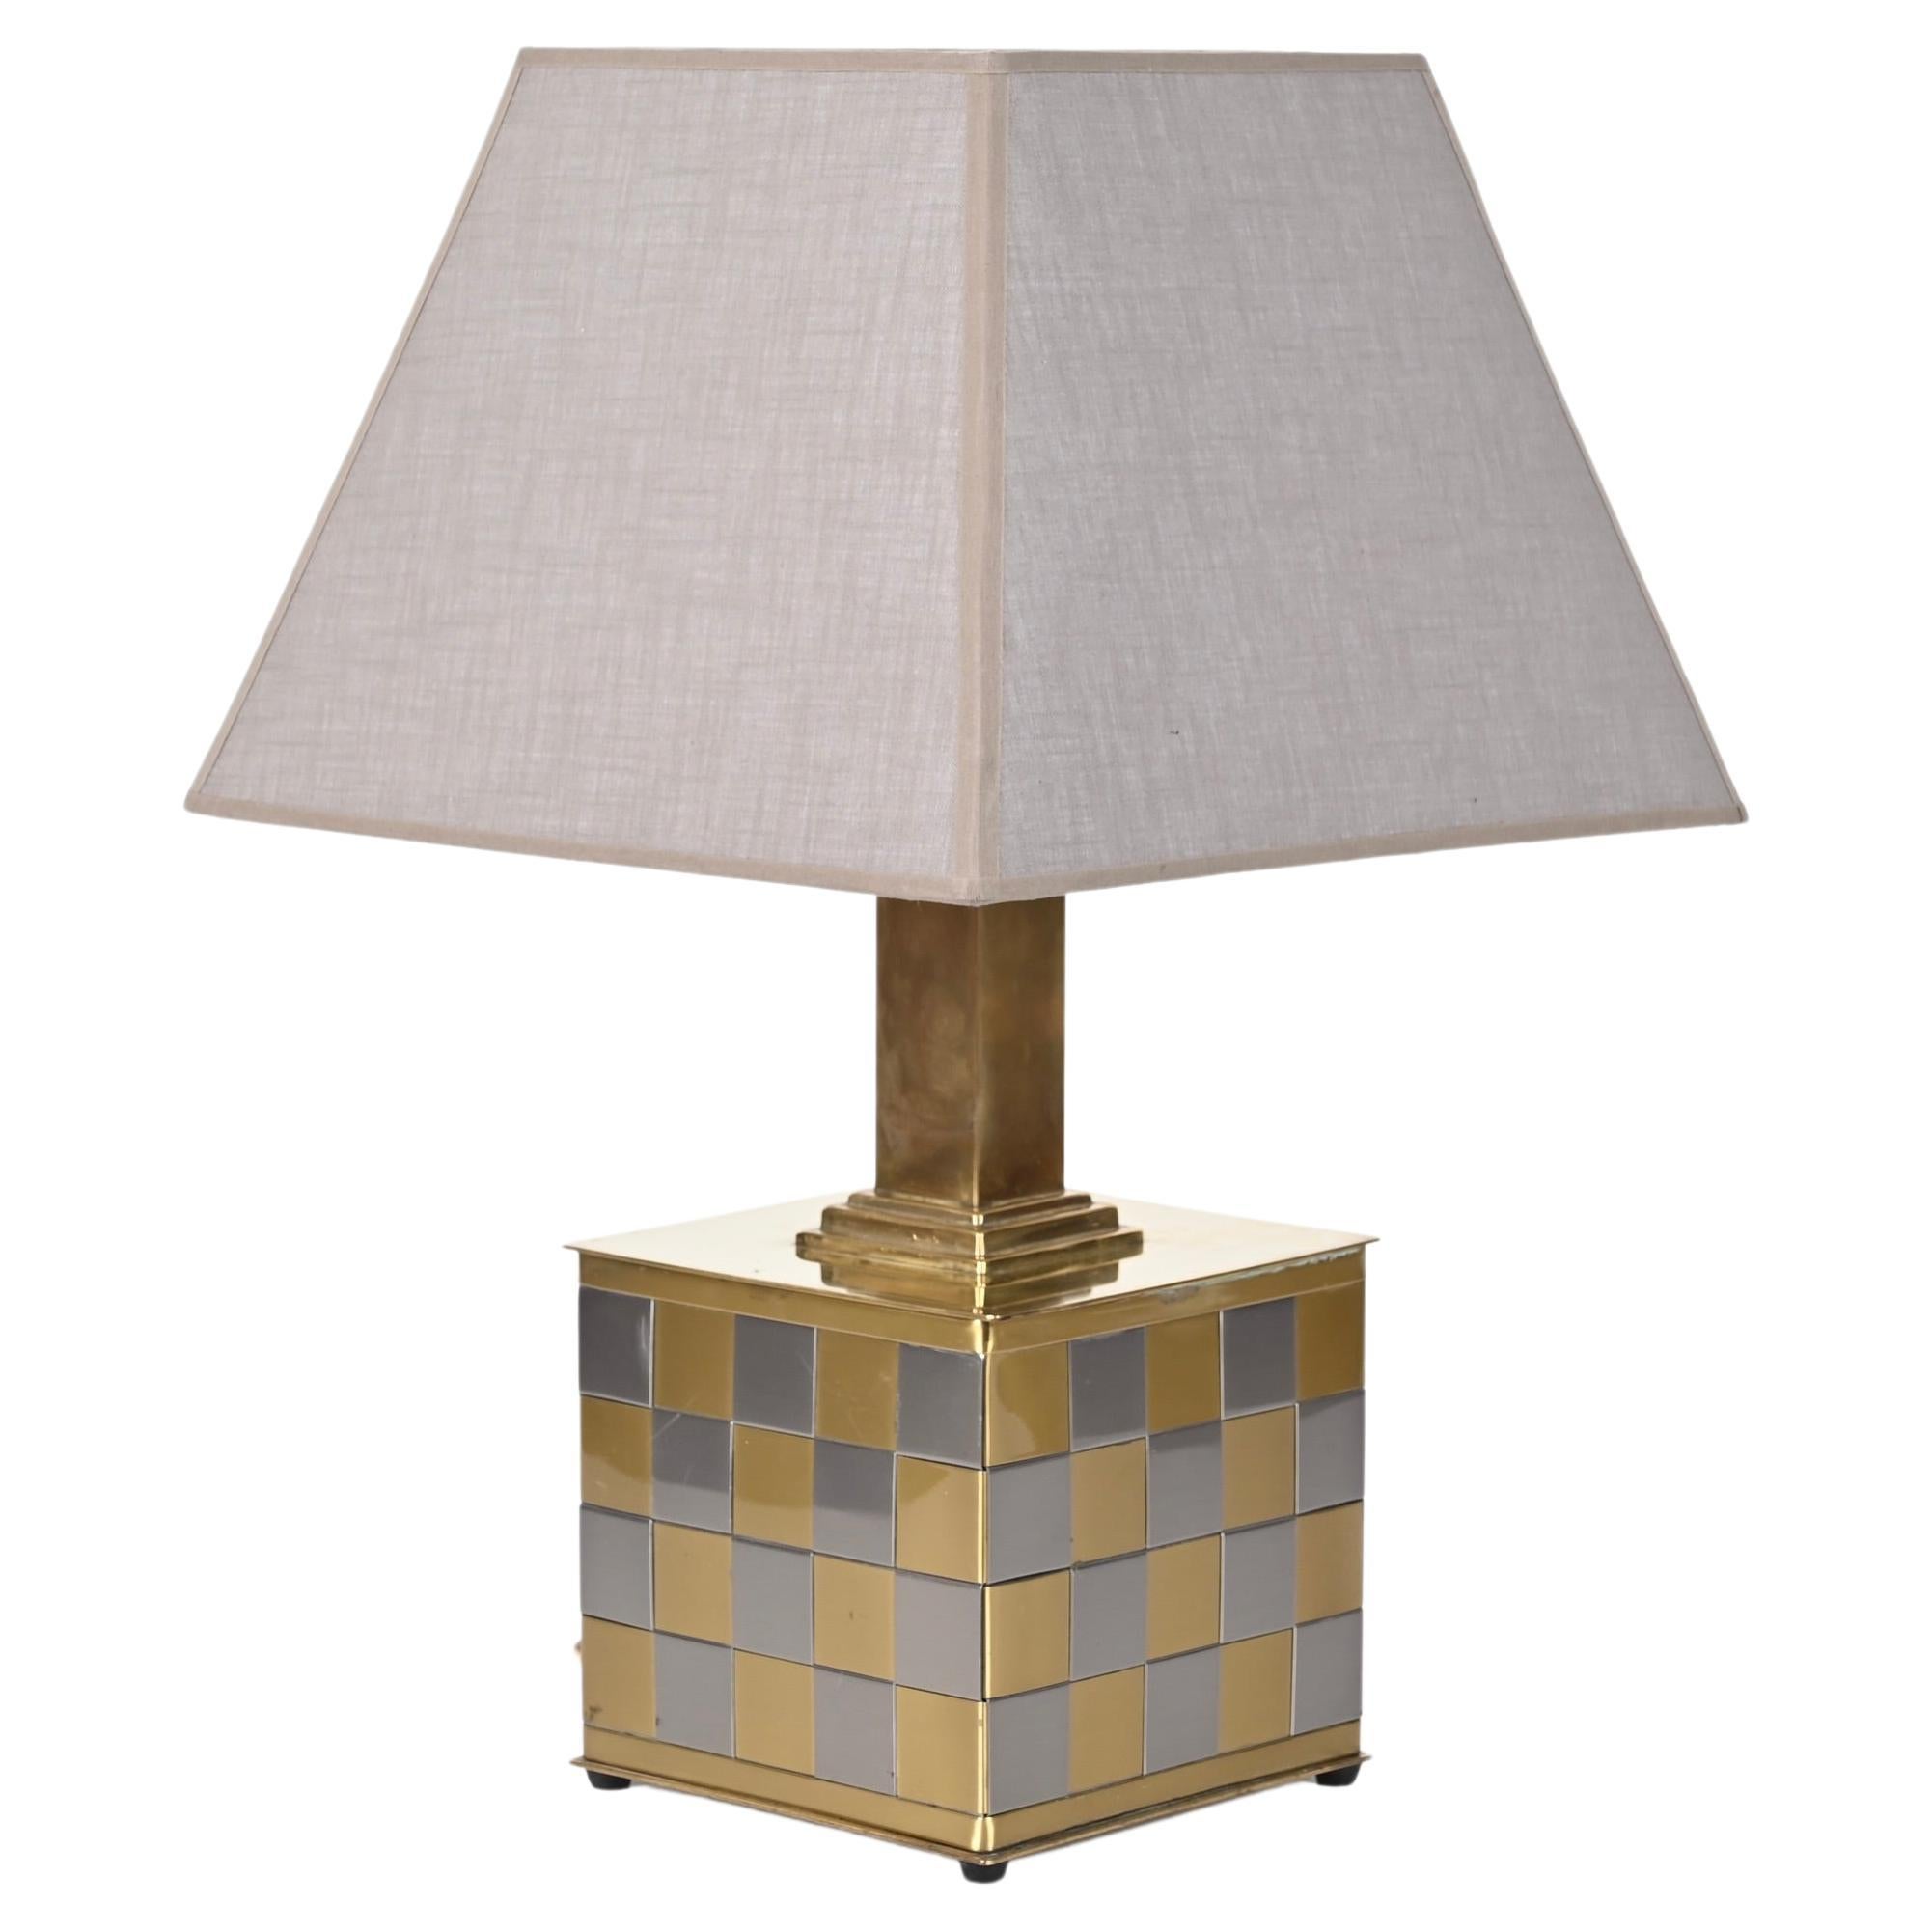 Midcentury Brass and Chrome Table Lamp, Willy Rizzo, Italy 1970s